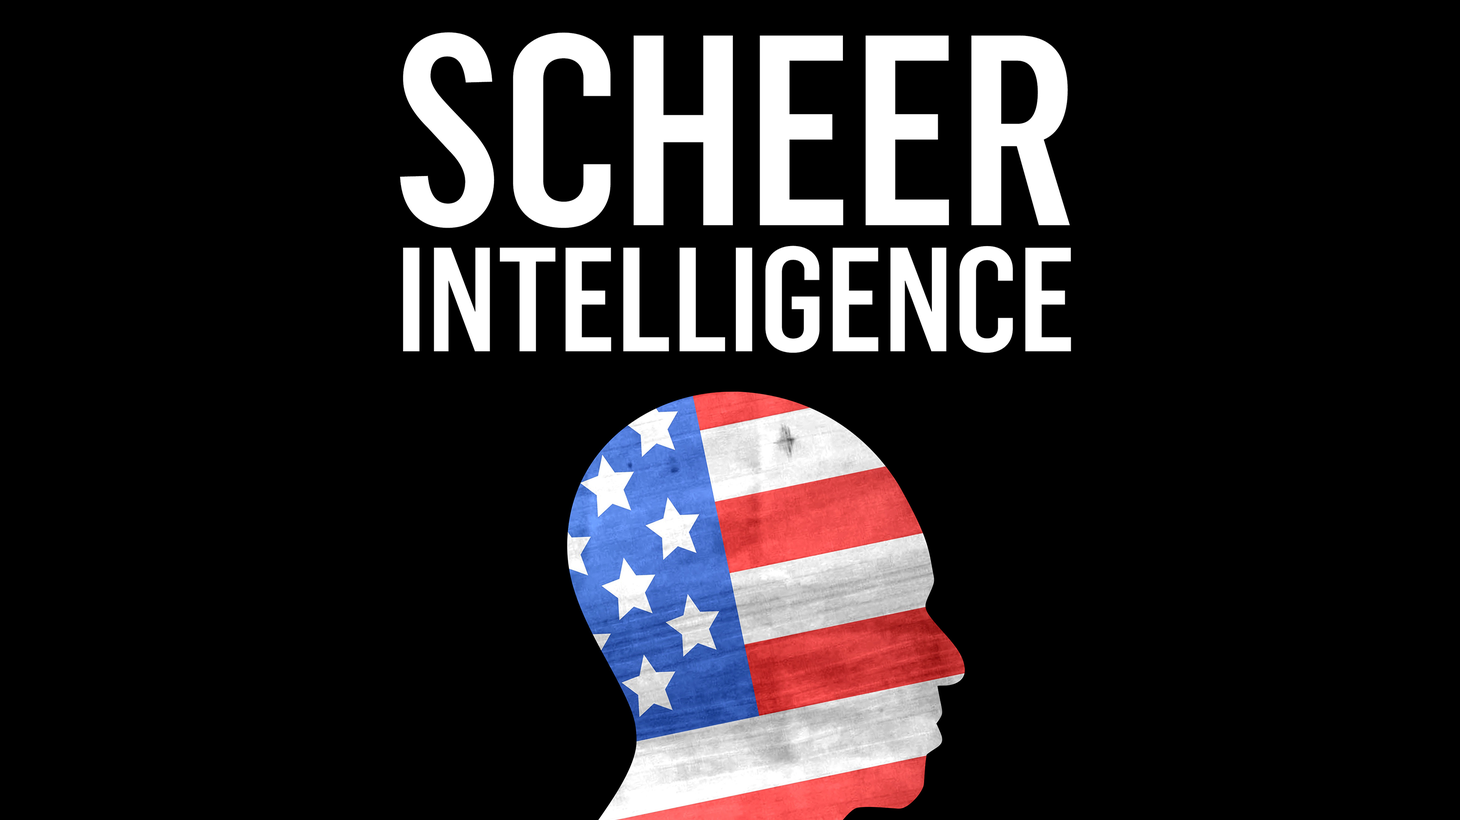 In this week’s Scheer Intelligence, Robert Scheer sits down with actress, singer, and writer Barbara Williams to discuss her new memoir.